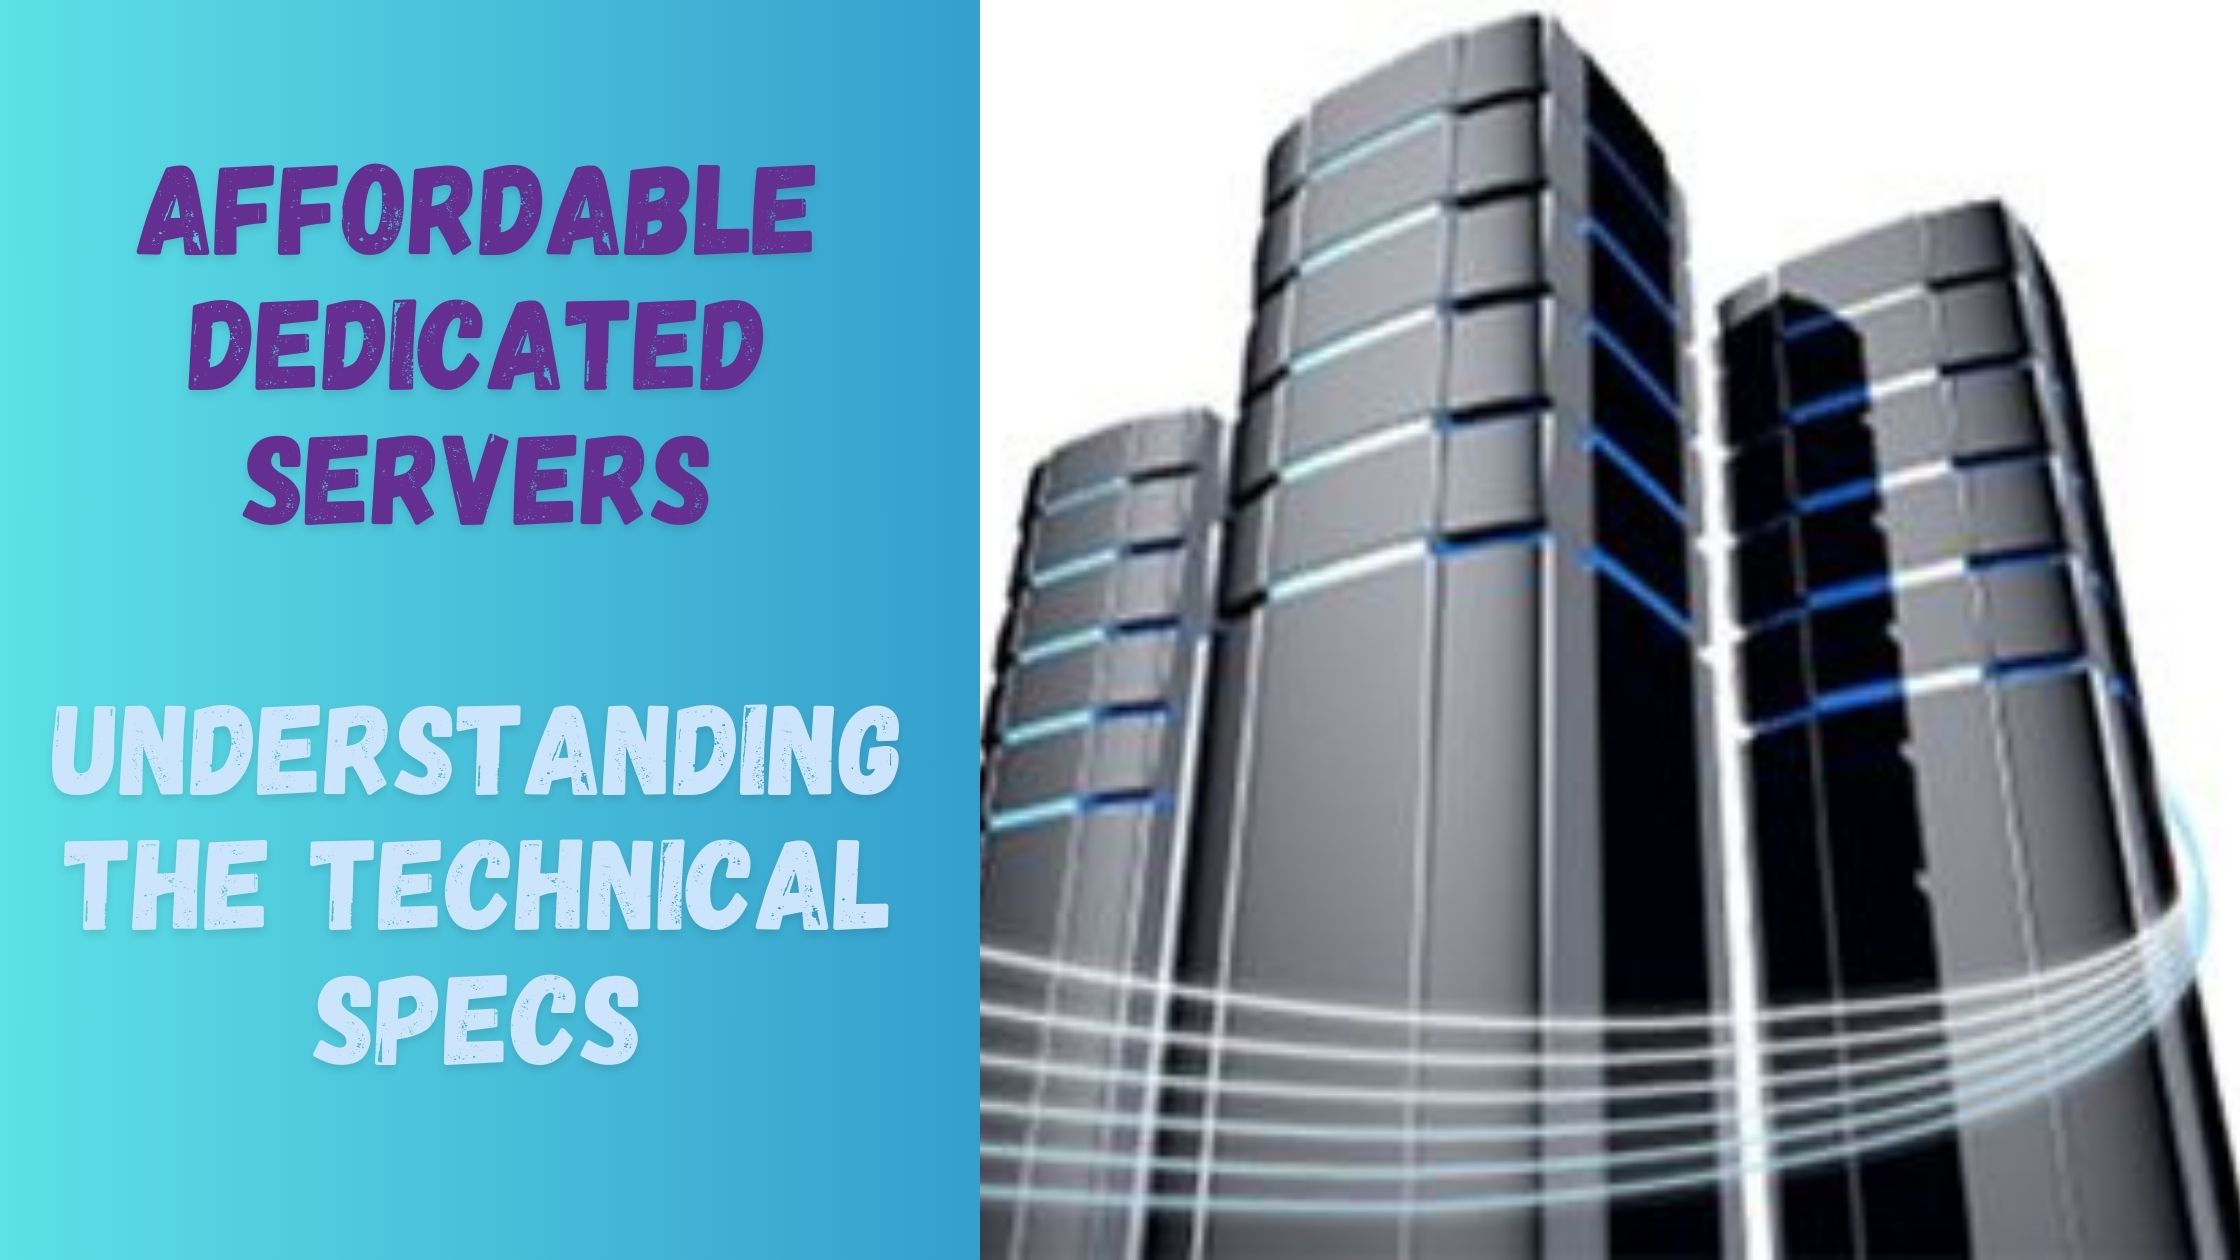 Affordable dedicated servers are a viable option for many businesses and individuals.